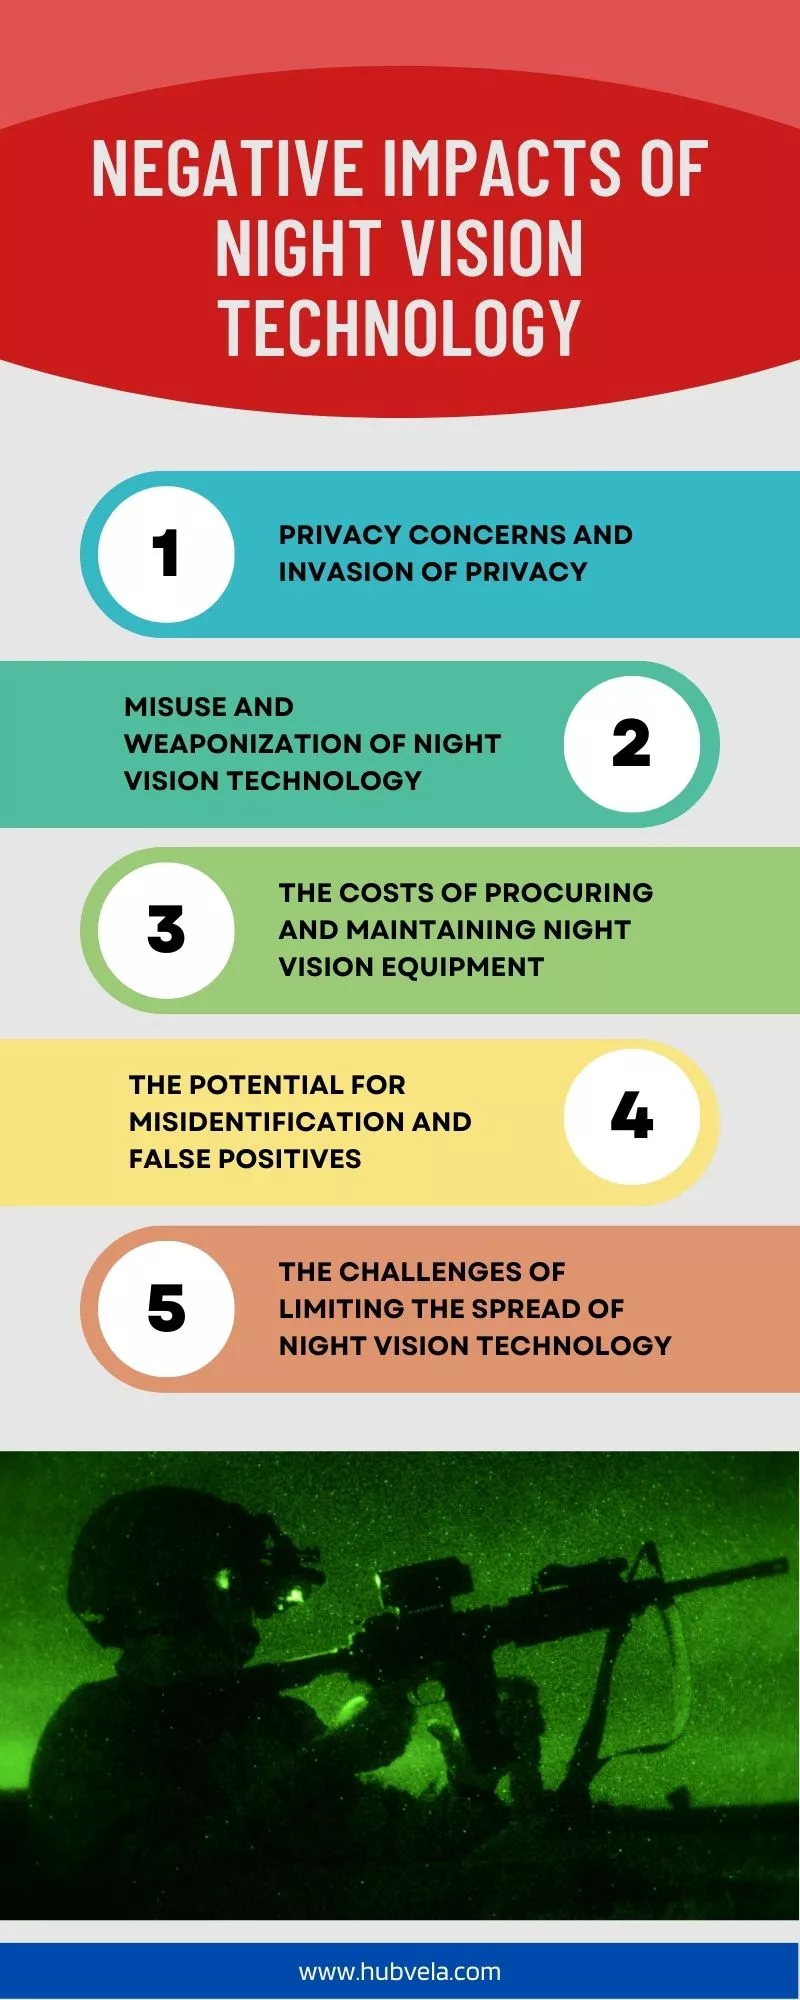 Negative Impacts of Night Vision Technology infographic